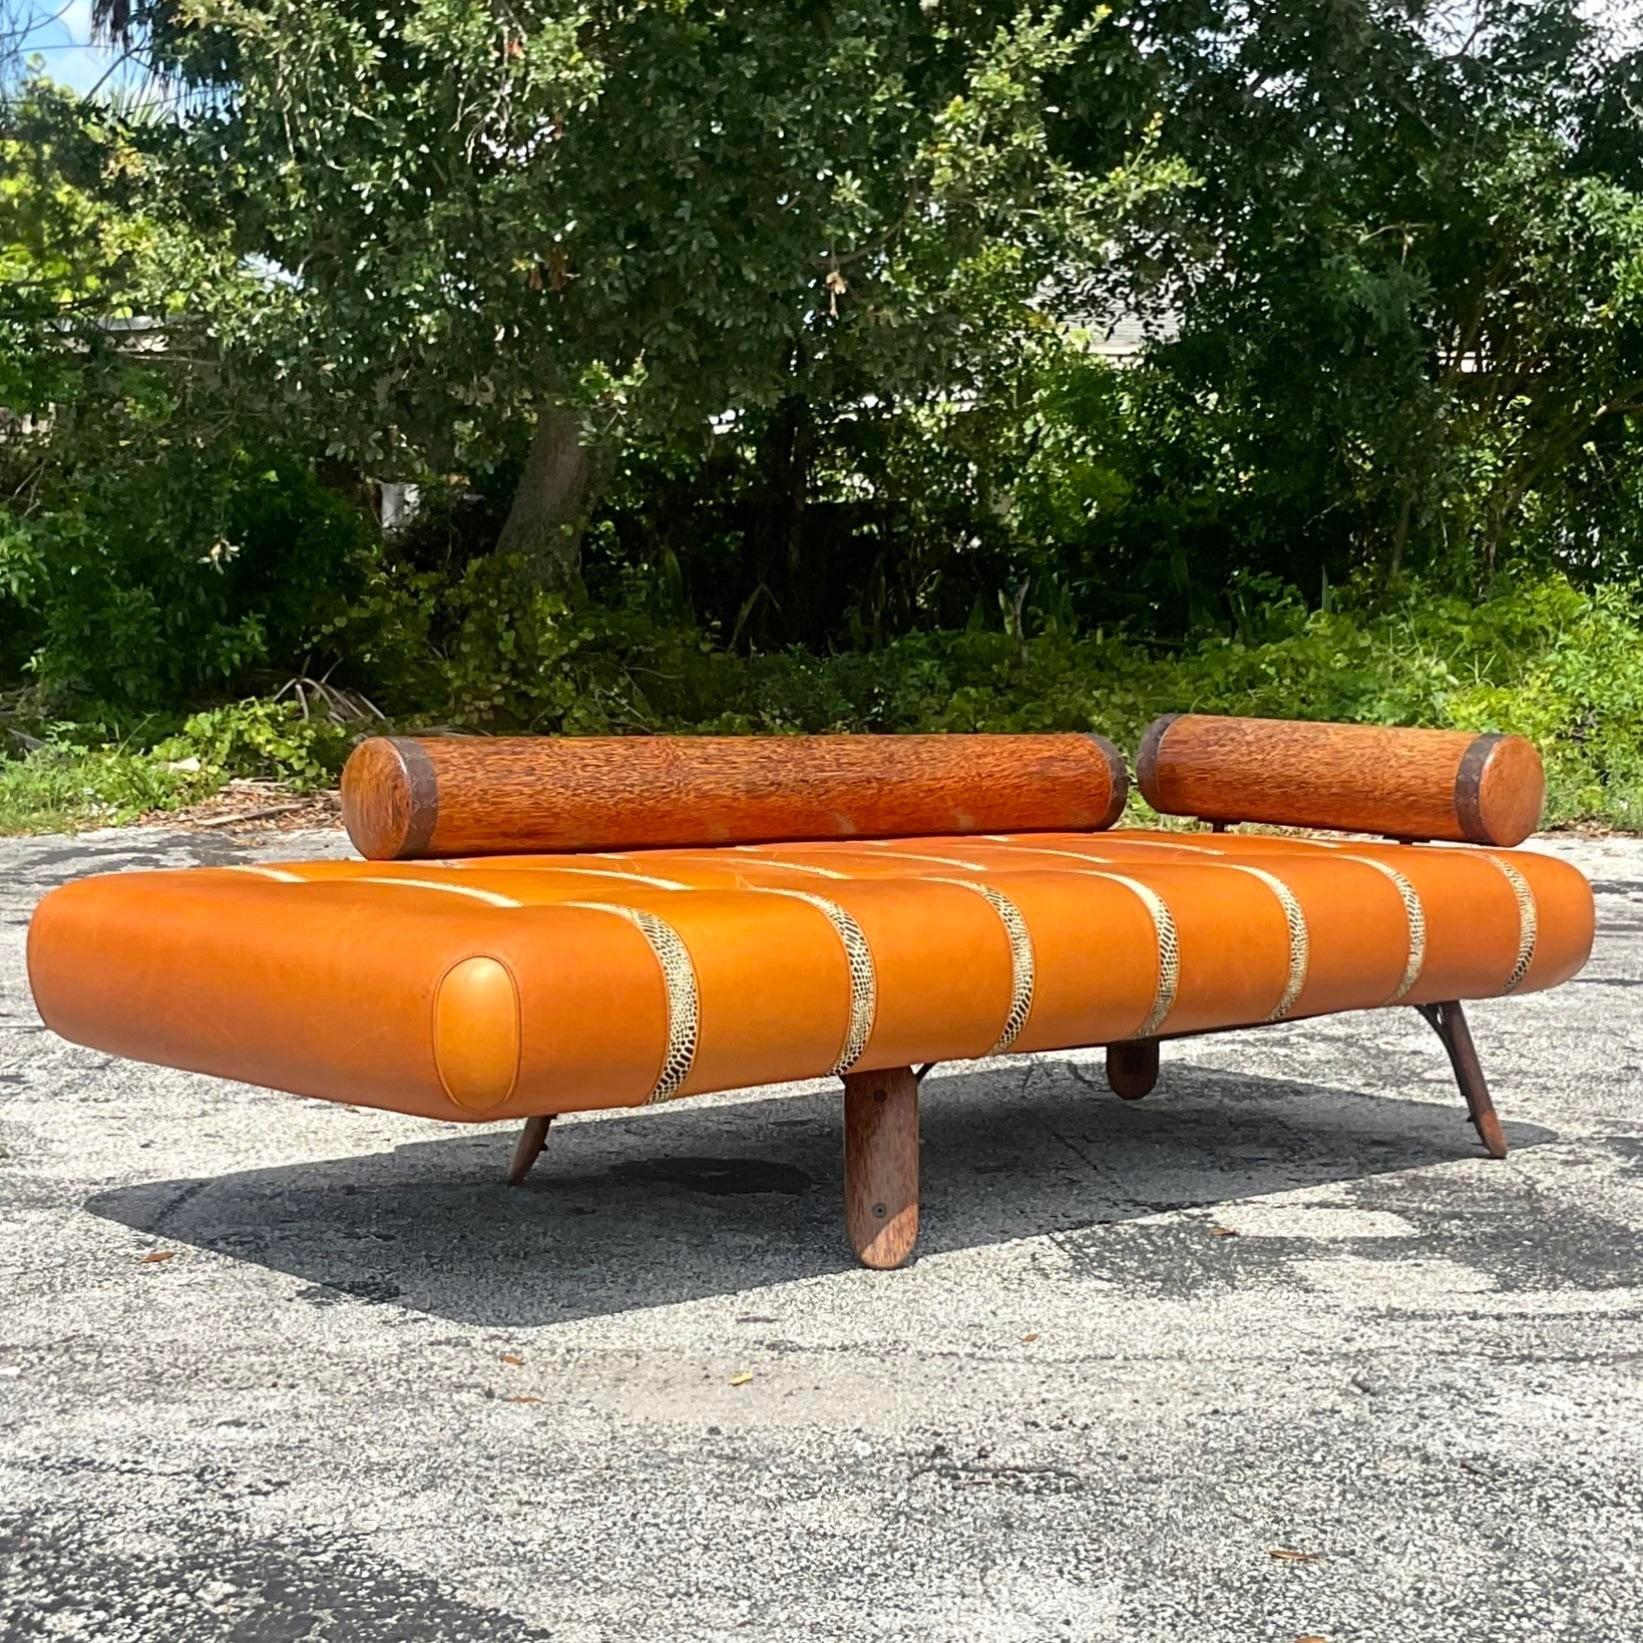 A fabulous Boho chaise lounge. Made by the iconic Australian group Pacific Green. Gorgeous leather upholstery with printed python leather inset strips. 40 year old palm Tree trunks used for the back and side bolsters. A real work of art. Acquired